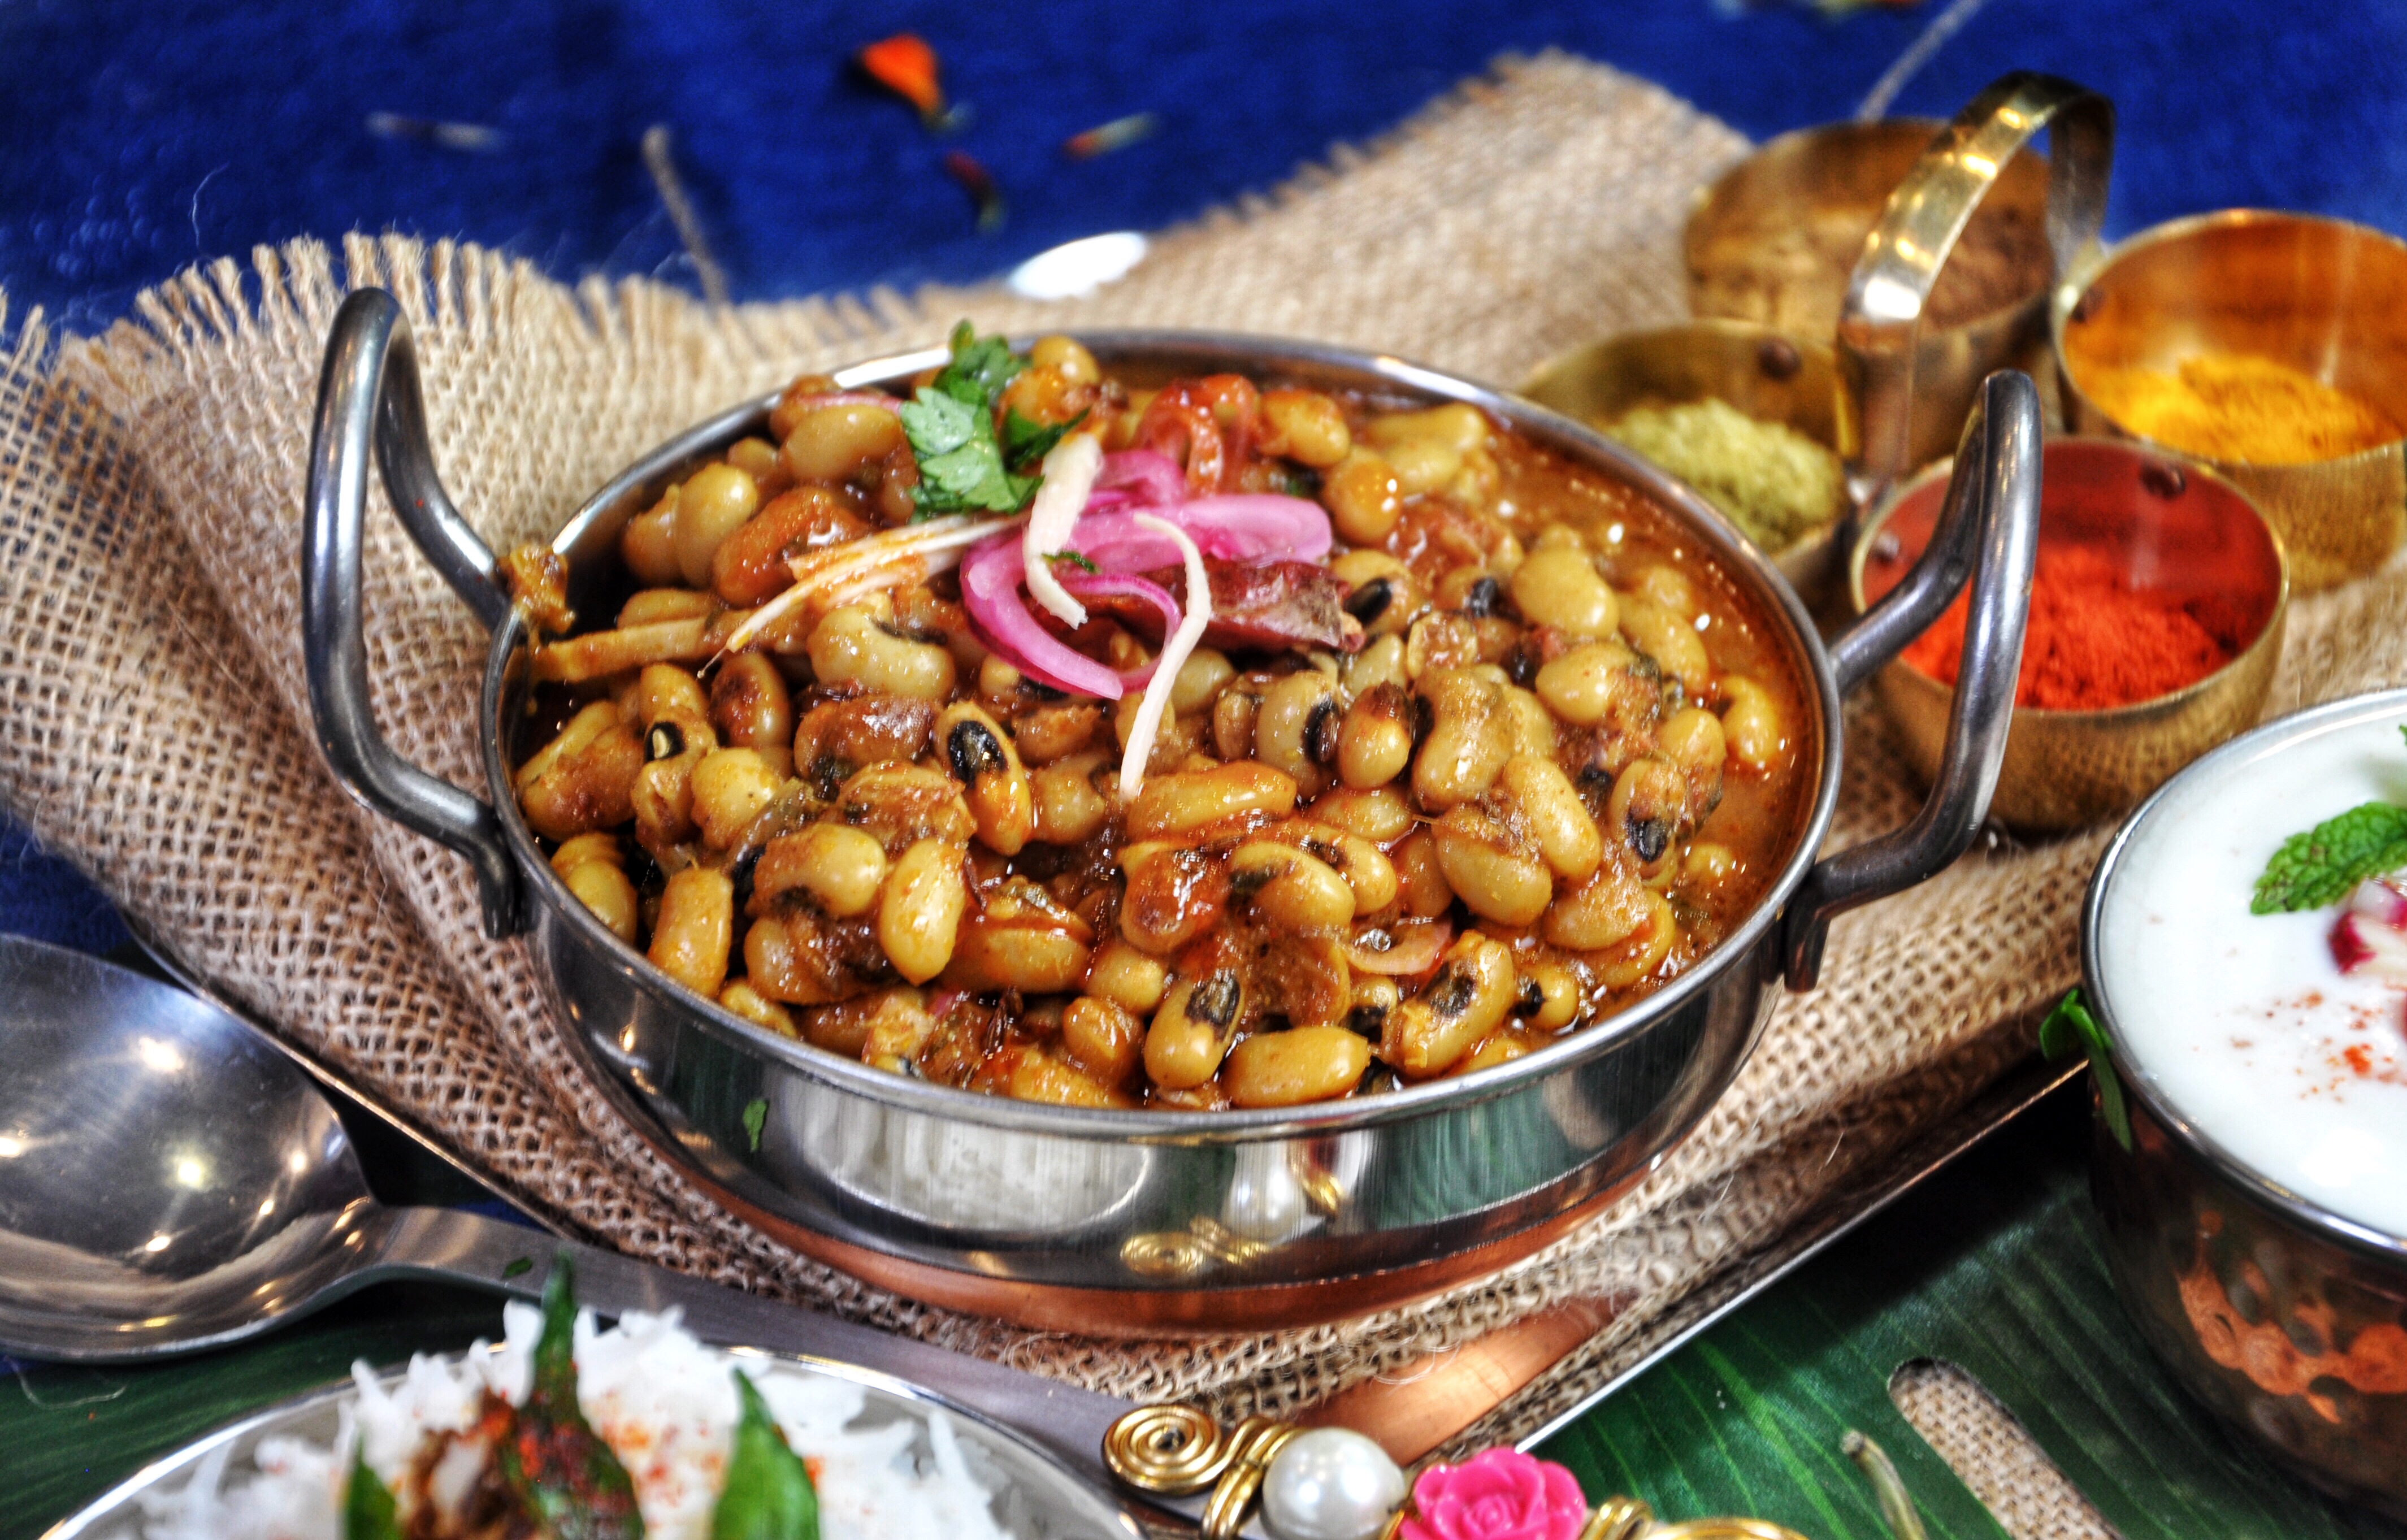 Super flavorful with sweet and tangy notes, these protein packed Lobia-Black Eyed Beans Masala (Instant Pot or Stovetop) is an insanely quick and tasty recipe. Try this with rice or naan bread for a tasty healthy meal!